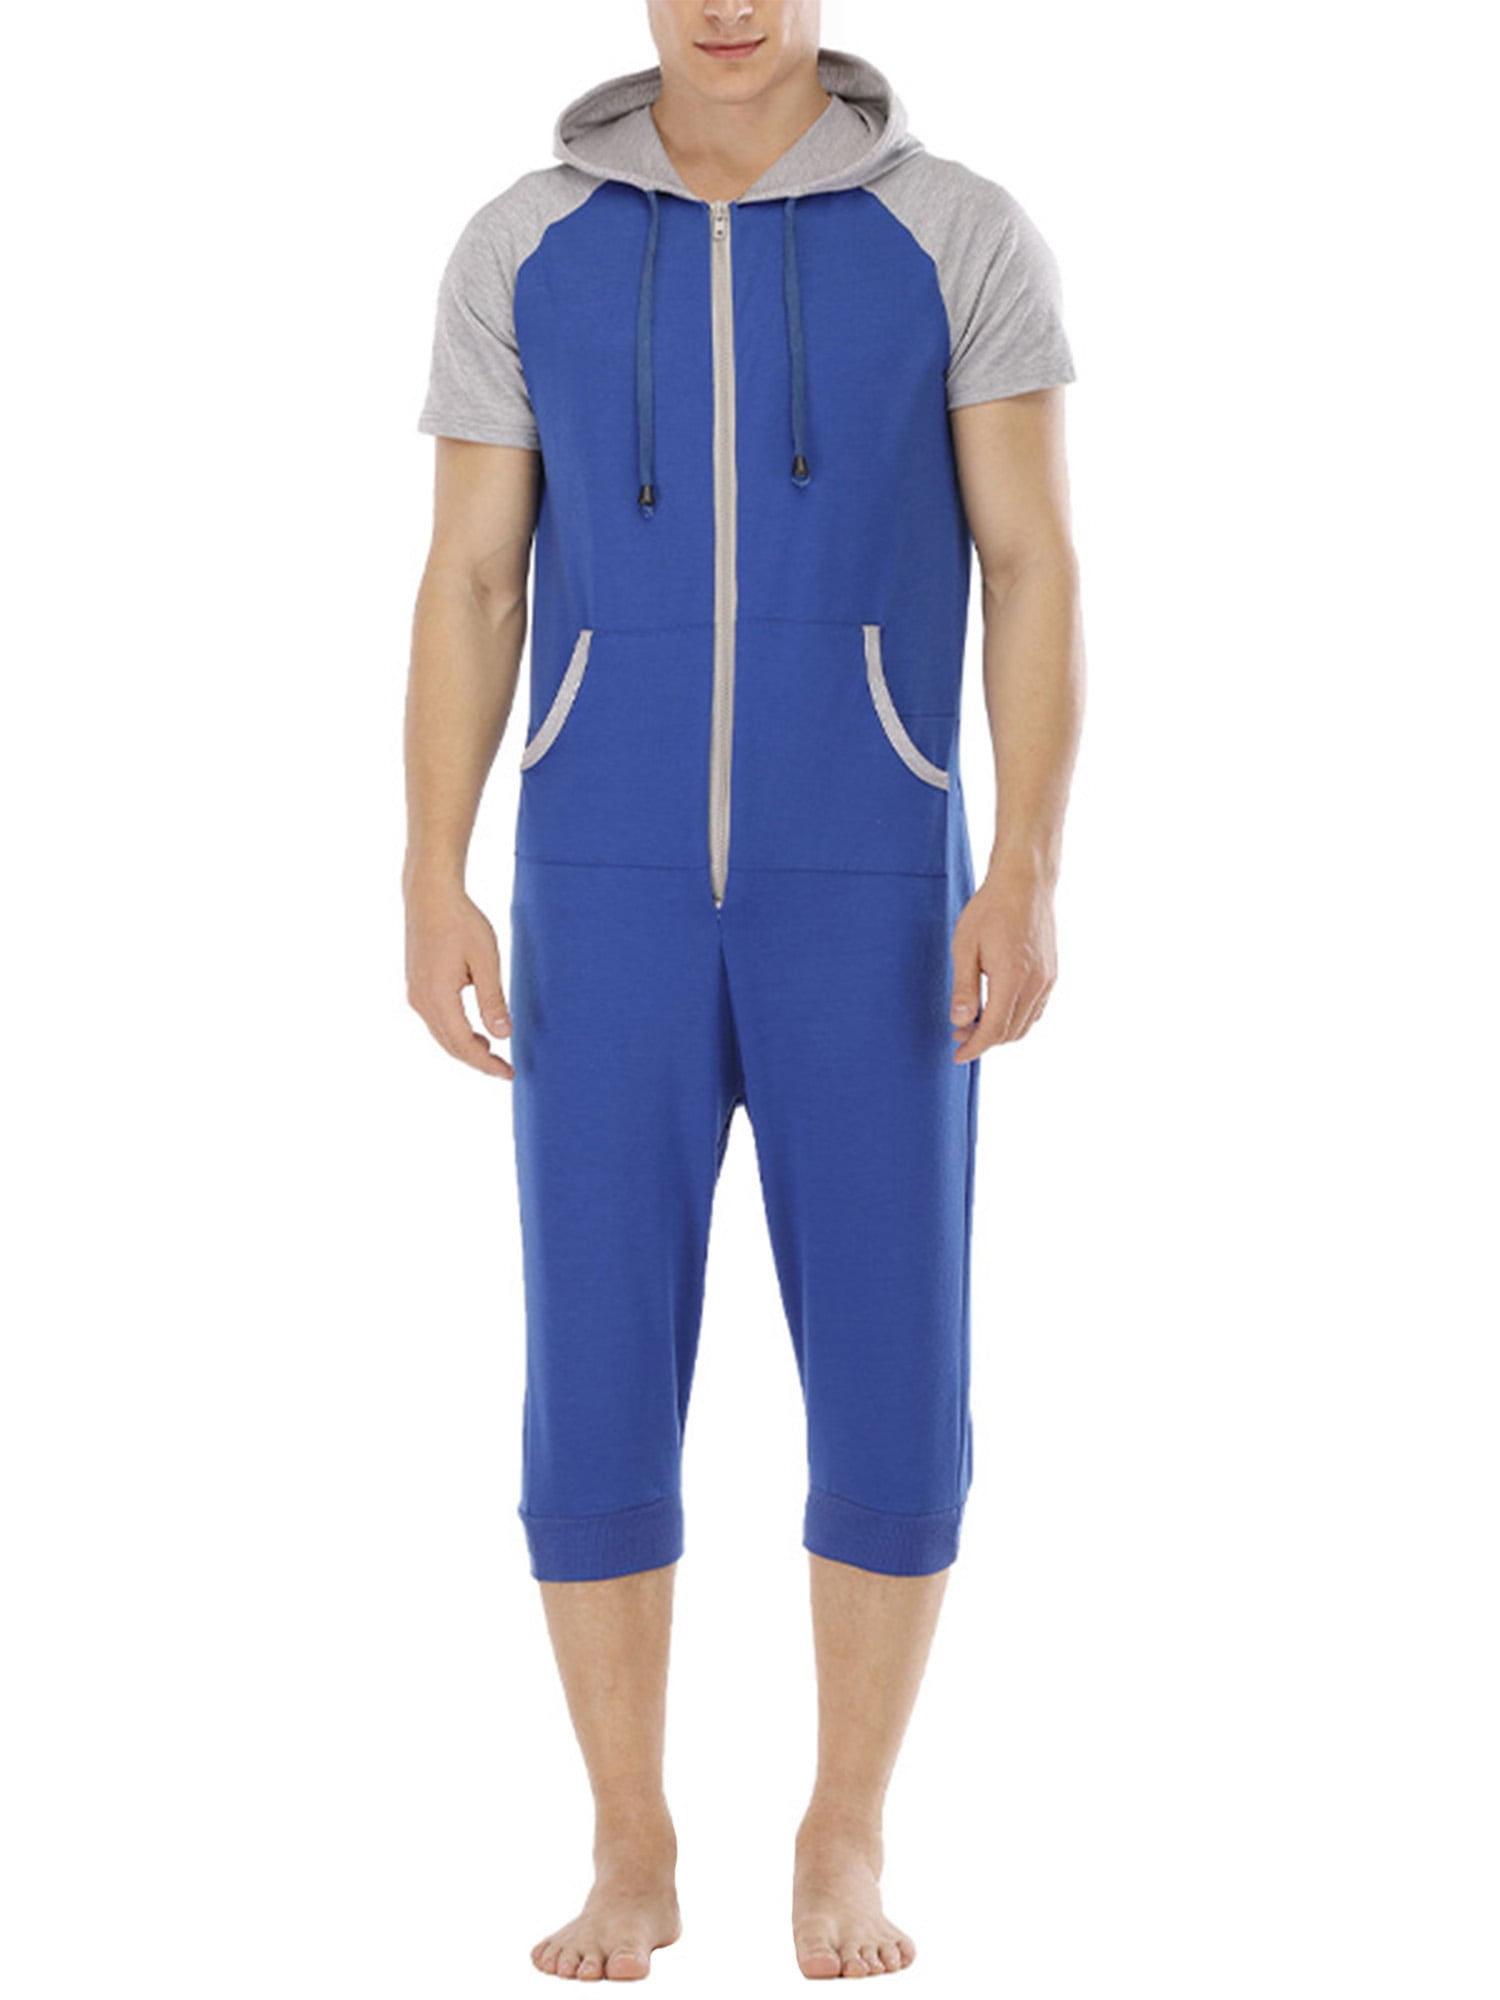 Sport Suit for Men Jogger Festive Romper Casual Clothing Shorts Tracksuit Onesie Hooded Jumpsuit Pajama Outfit Set Dungarees Zip Shorts